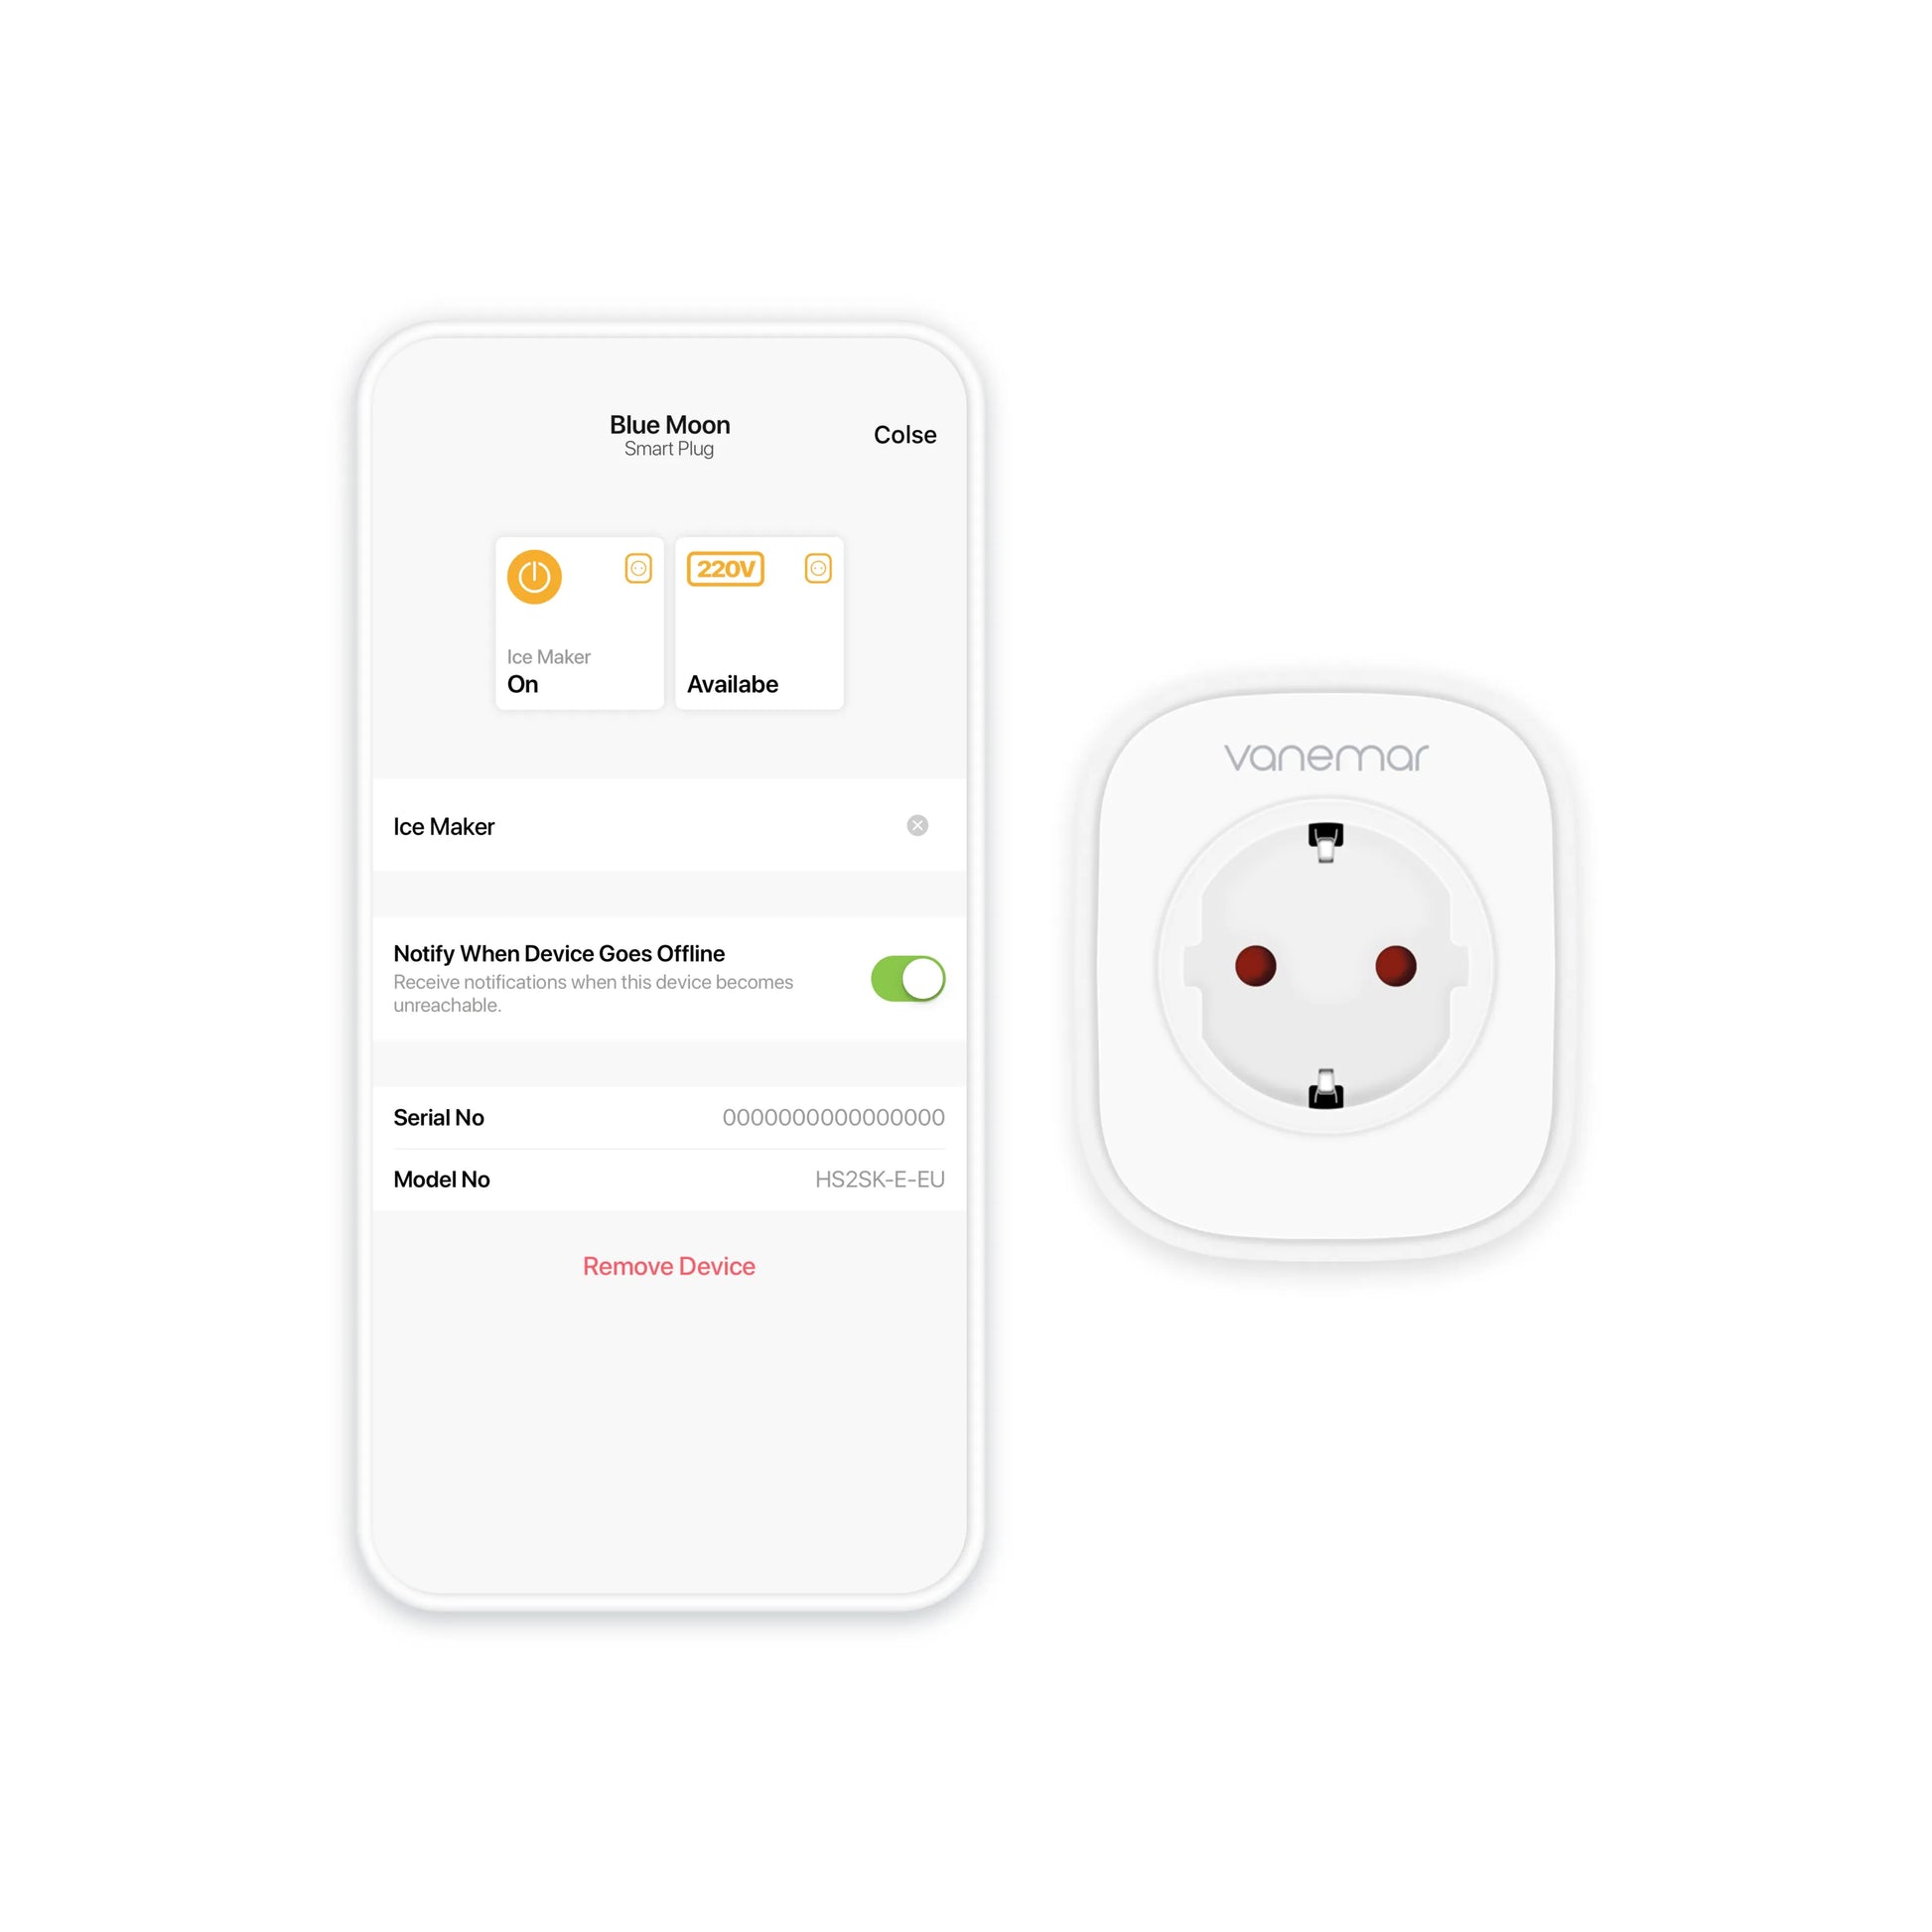 The operation of the smart plug is with the mobile application.